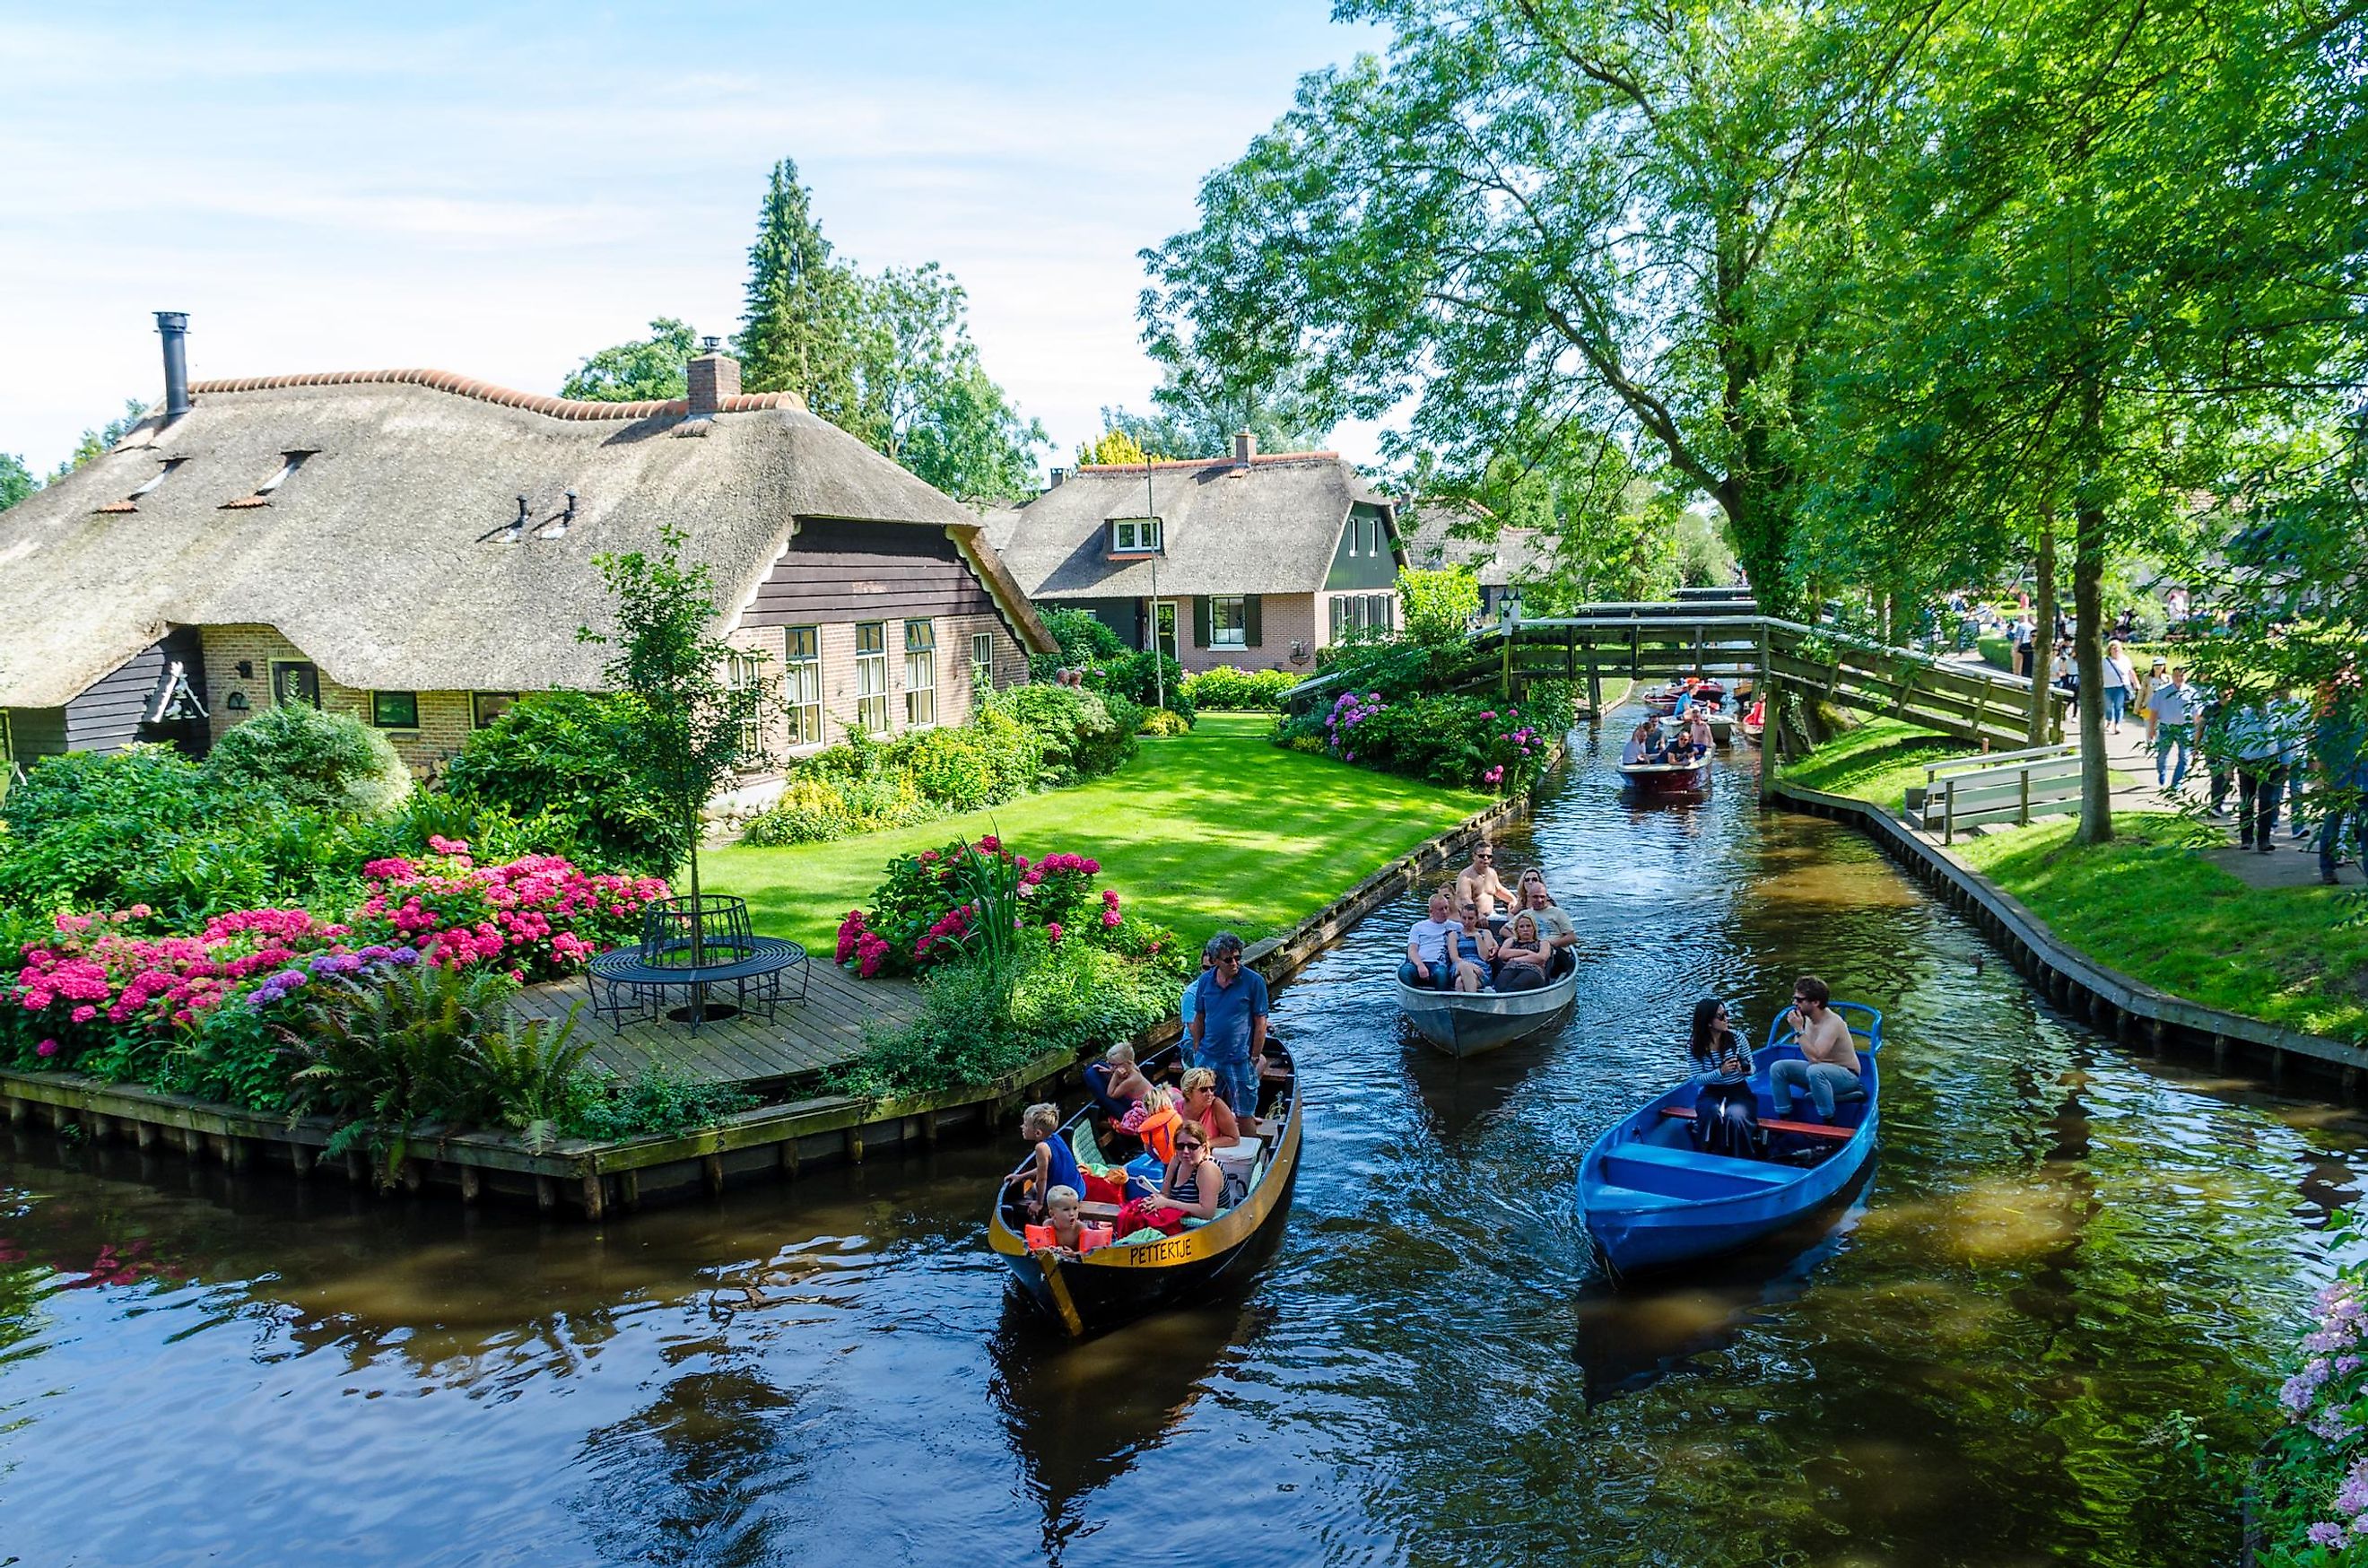 View of a canal and waterside houses in Giethoorn, Netherlands. Editorial credit: rob3rt82 / Shutterstock.com